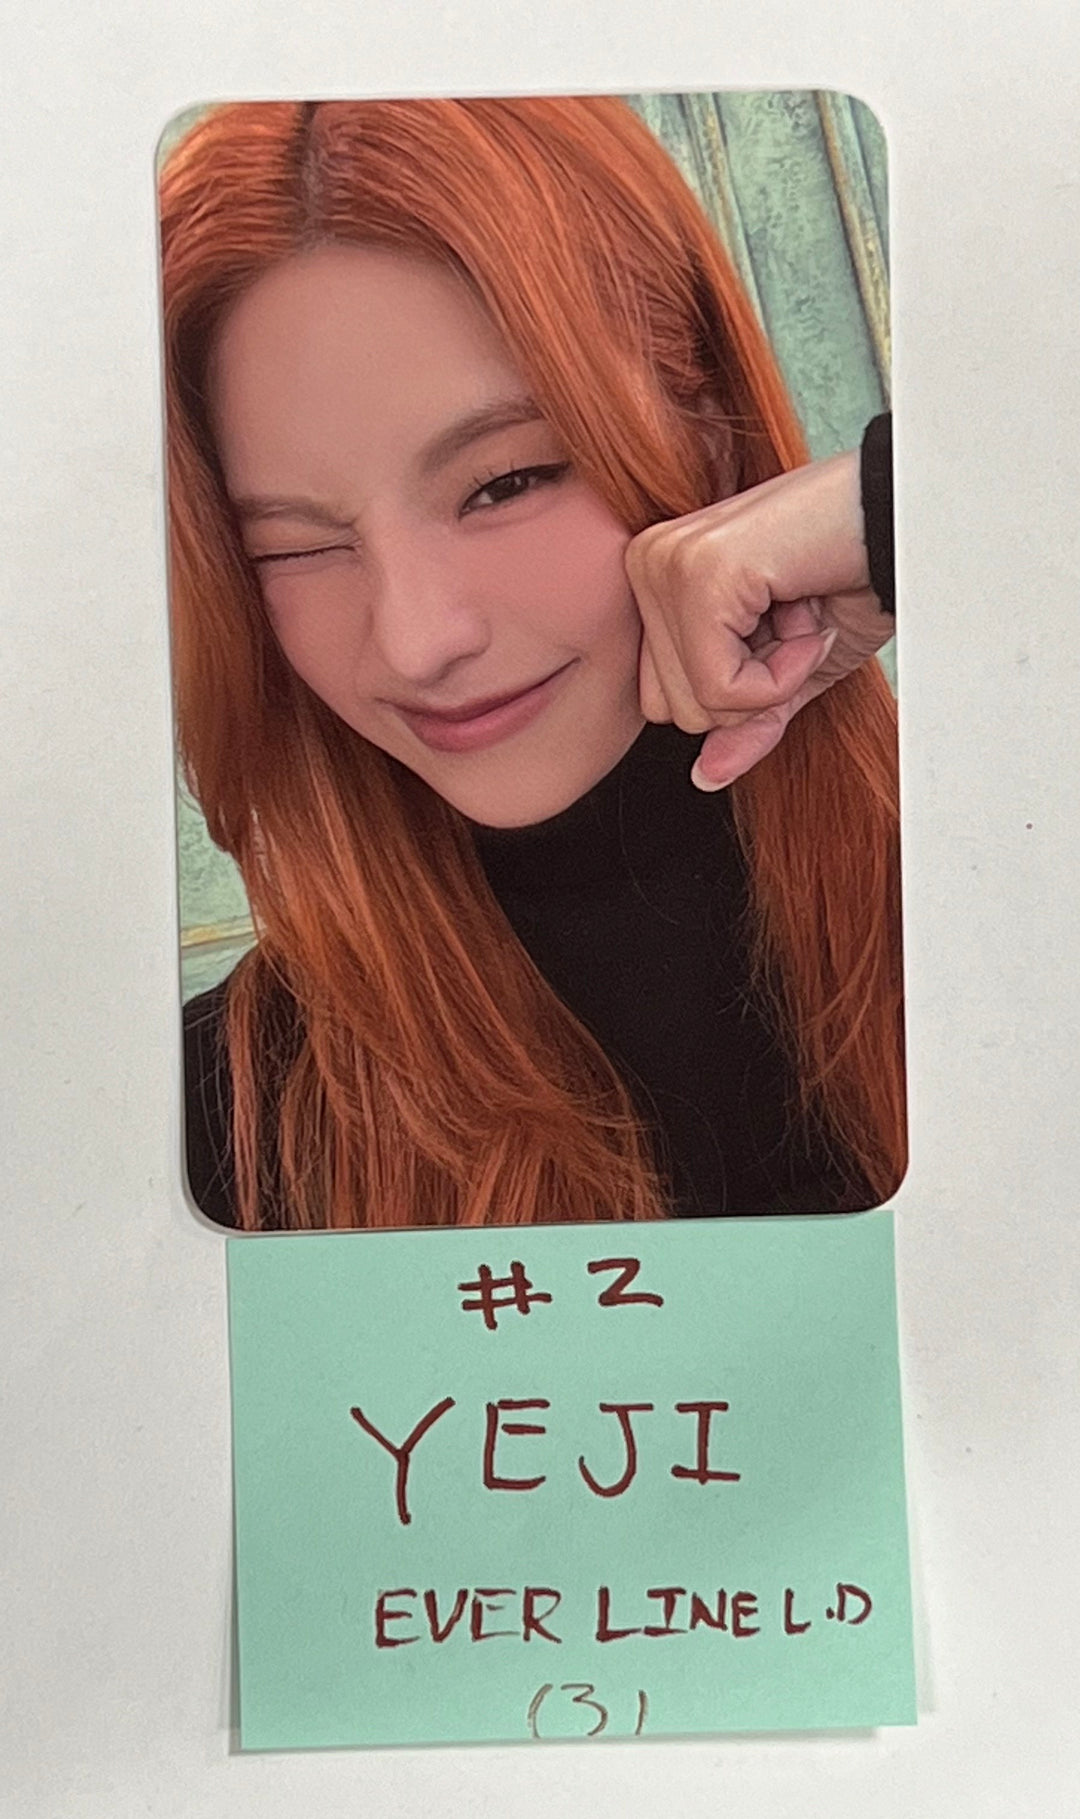 ITZY "BORN TO BE" - Everline Lucky Draw Event Photocard Round 2 [24.2.8]